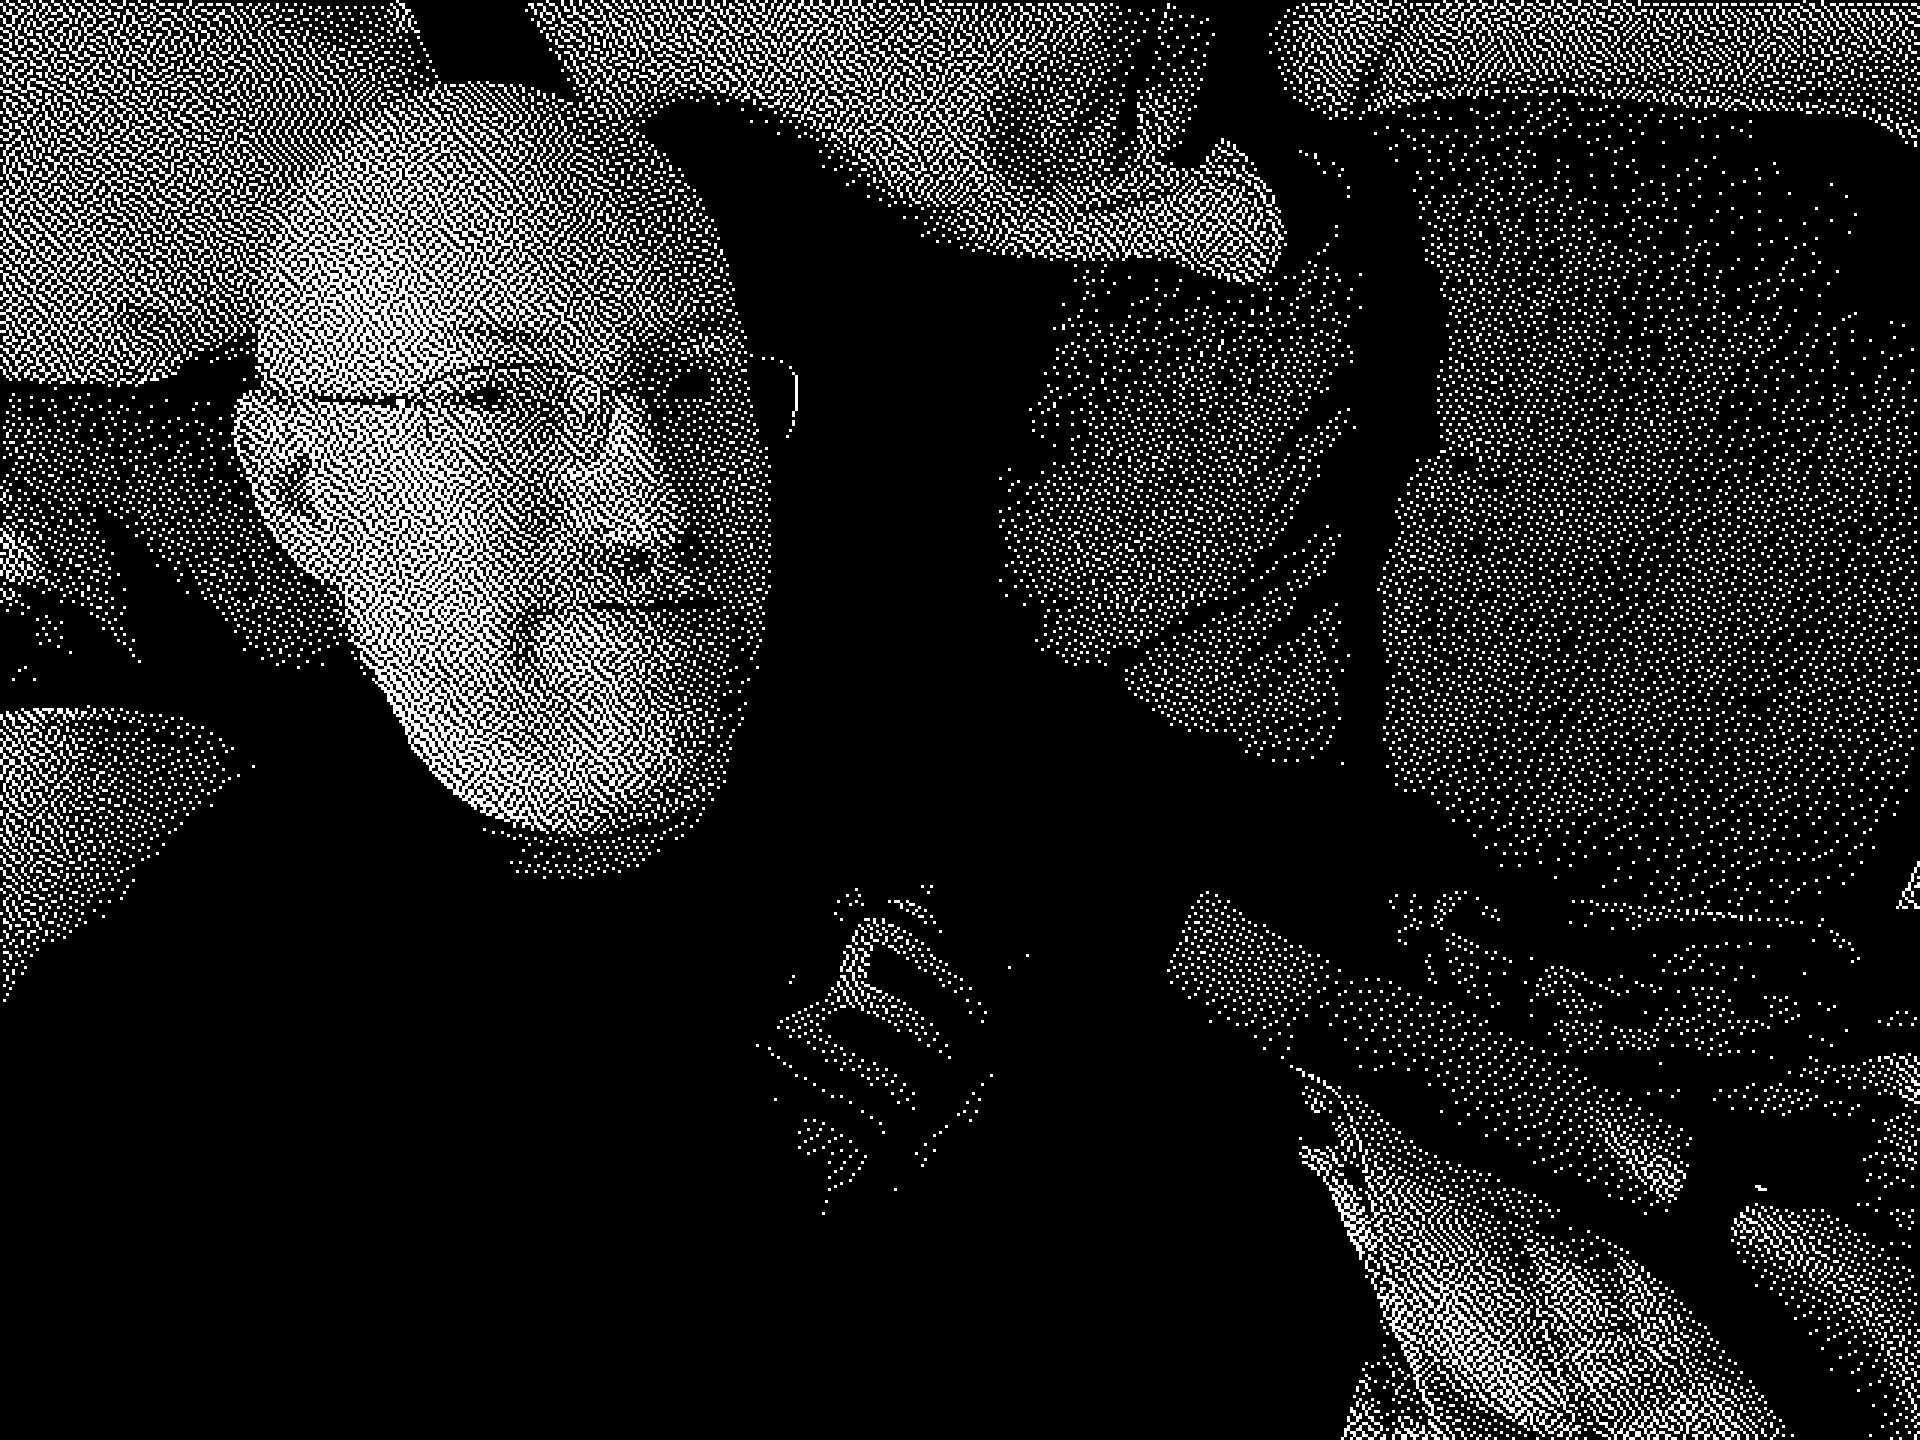 Me on a couch, in a one-bit pure black-and-white dithered photo in the style of old black-and-white Macintosh computers.